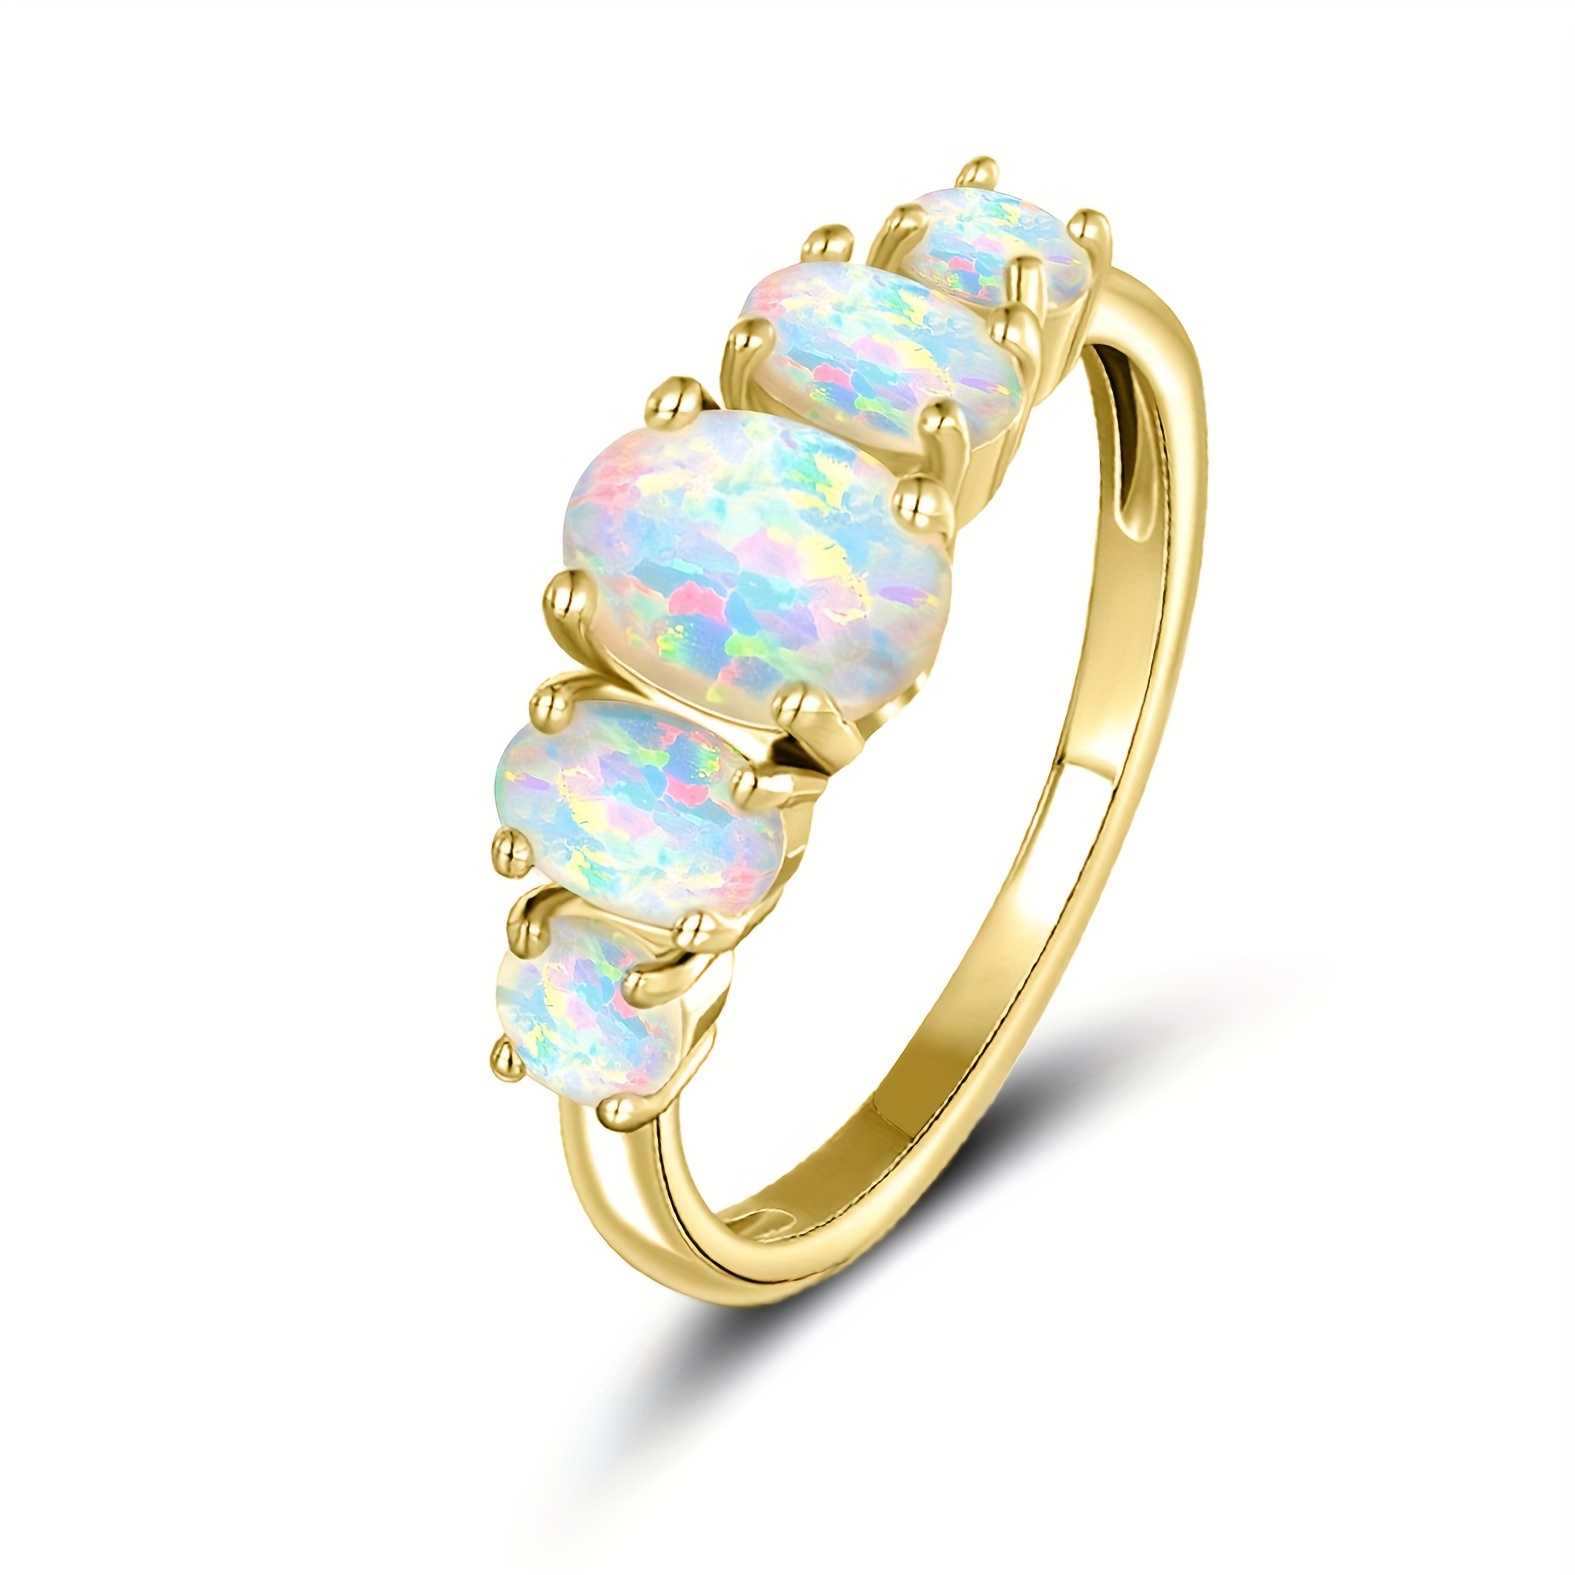 

Chic Ring 14k Gold Plated Inlaid A Row Of Opal Symbol Of Beauty And Elegance Match Daily Outfits Party Accessory Dupes Luxury Ring